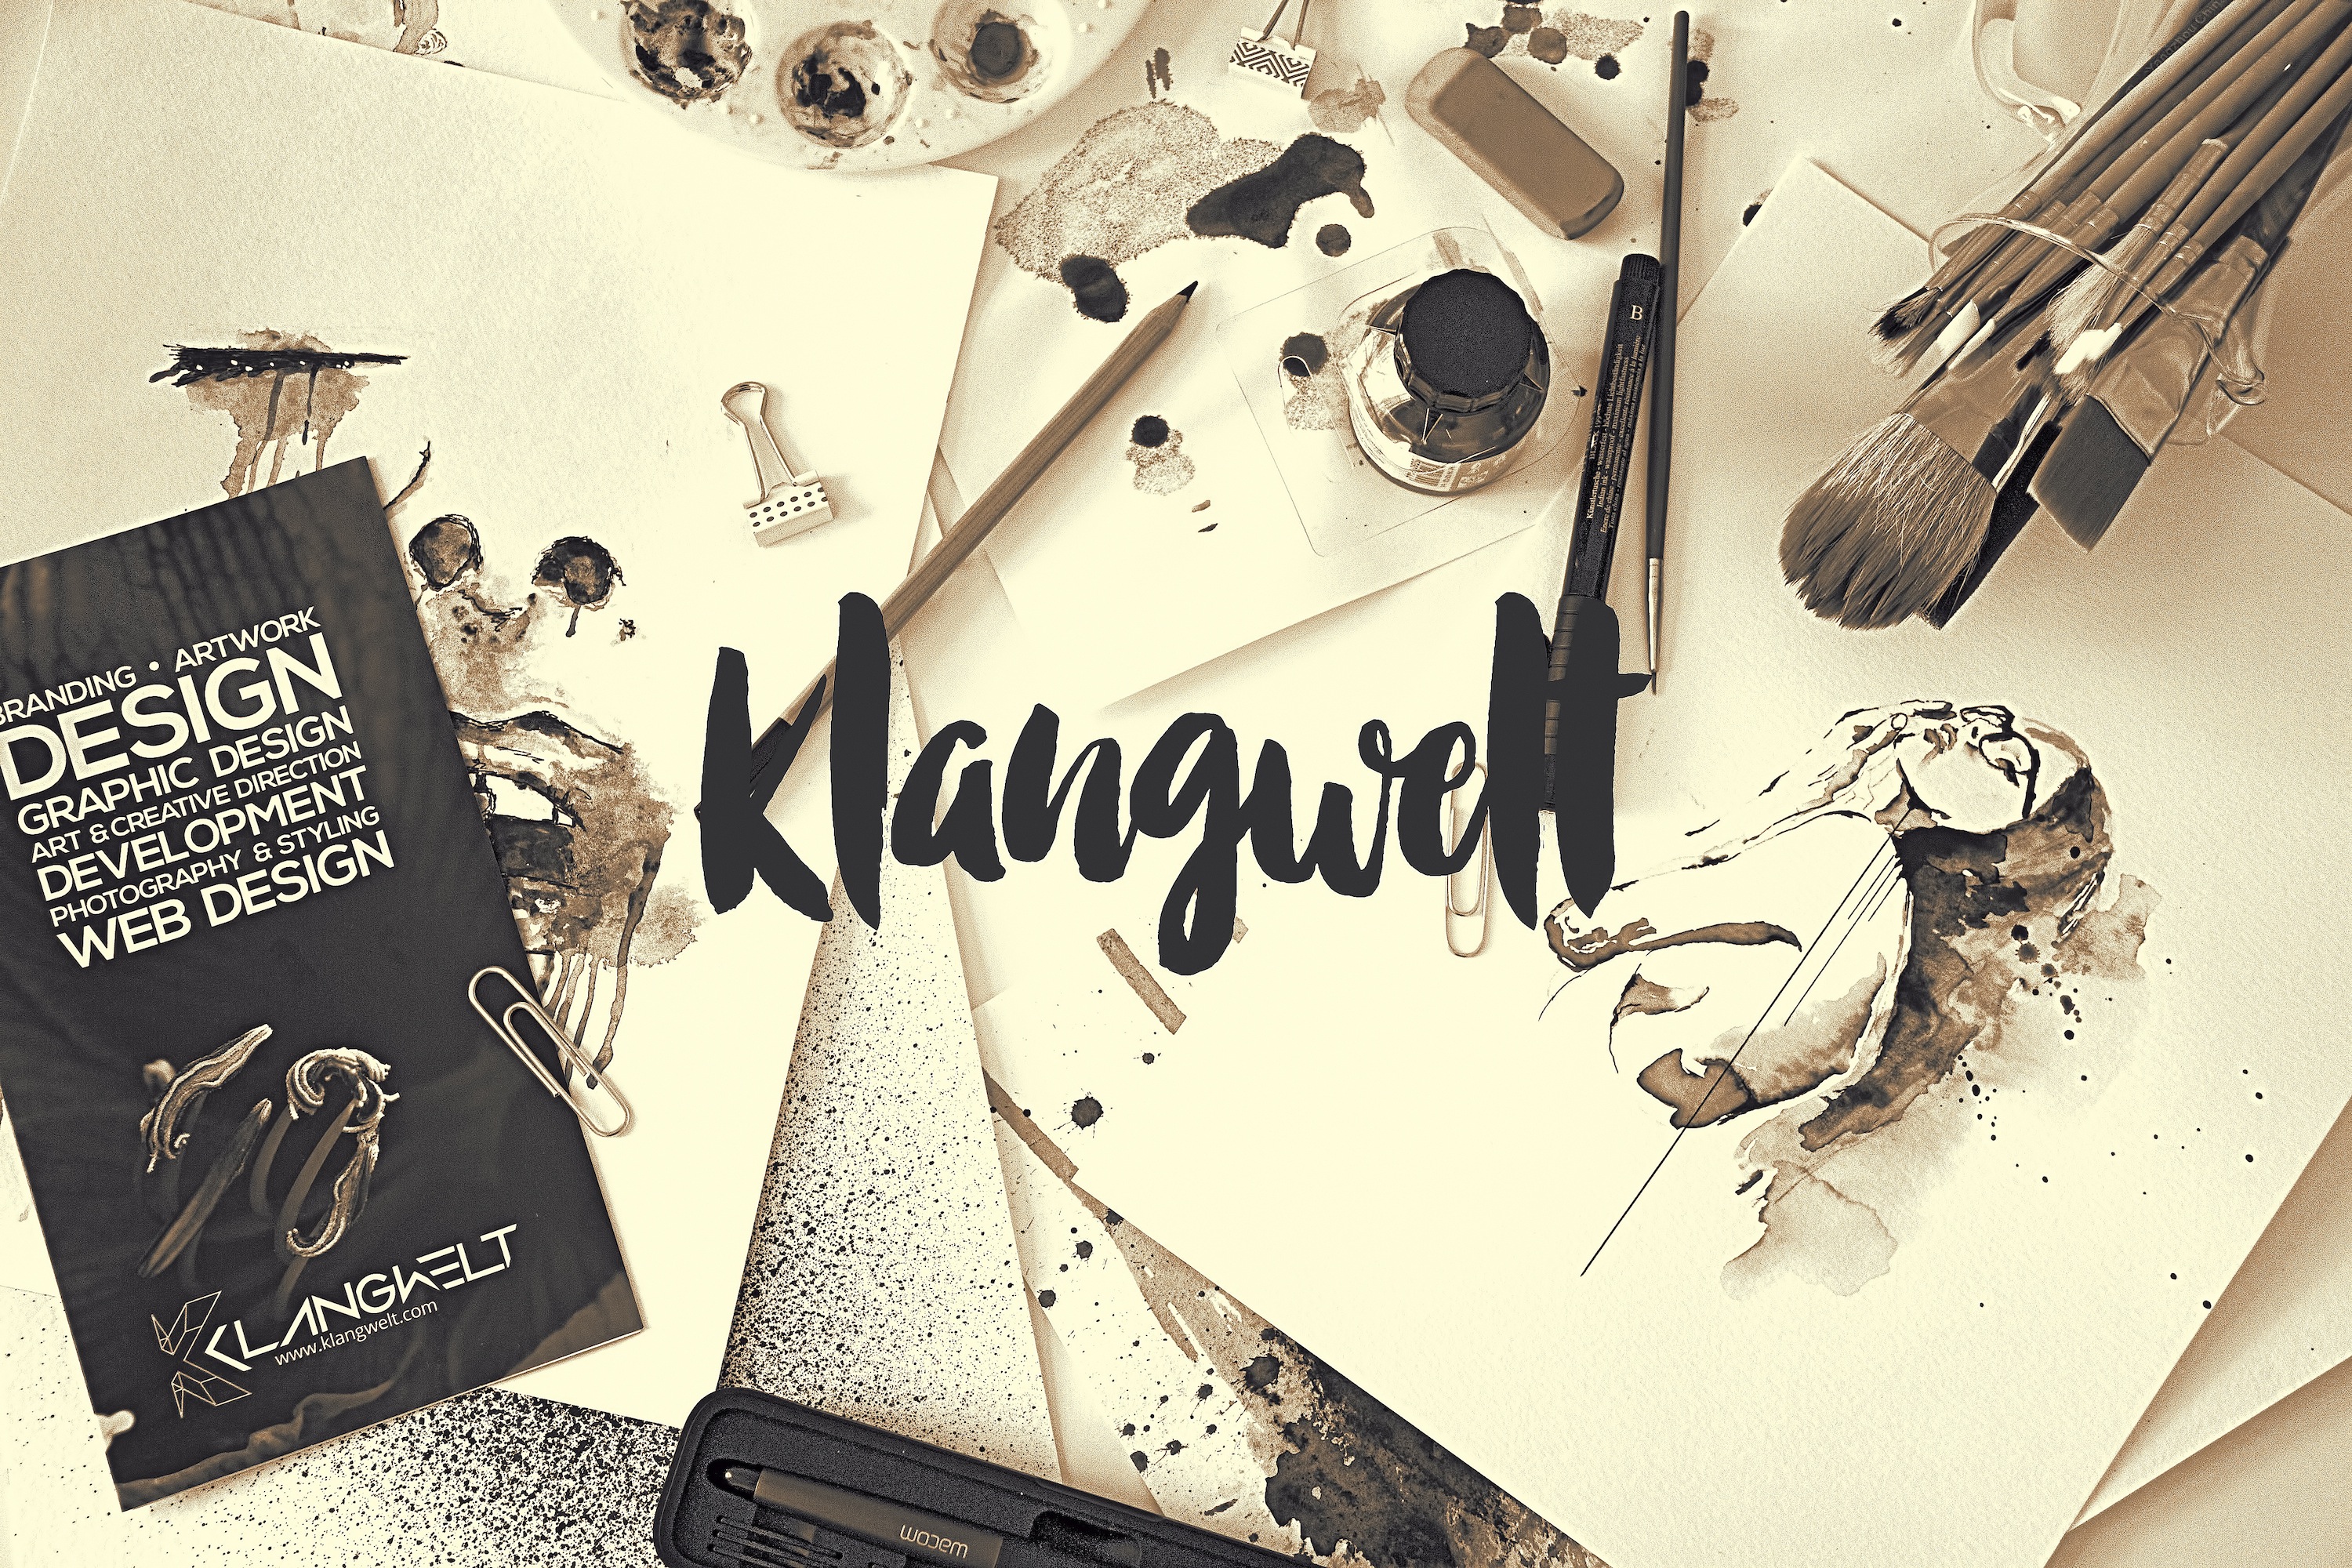 Graphic Design, Styling and Photography by Klangwelt